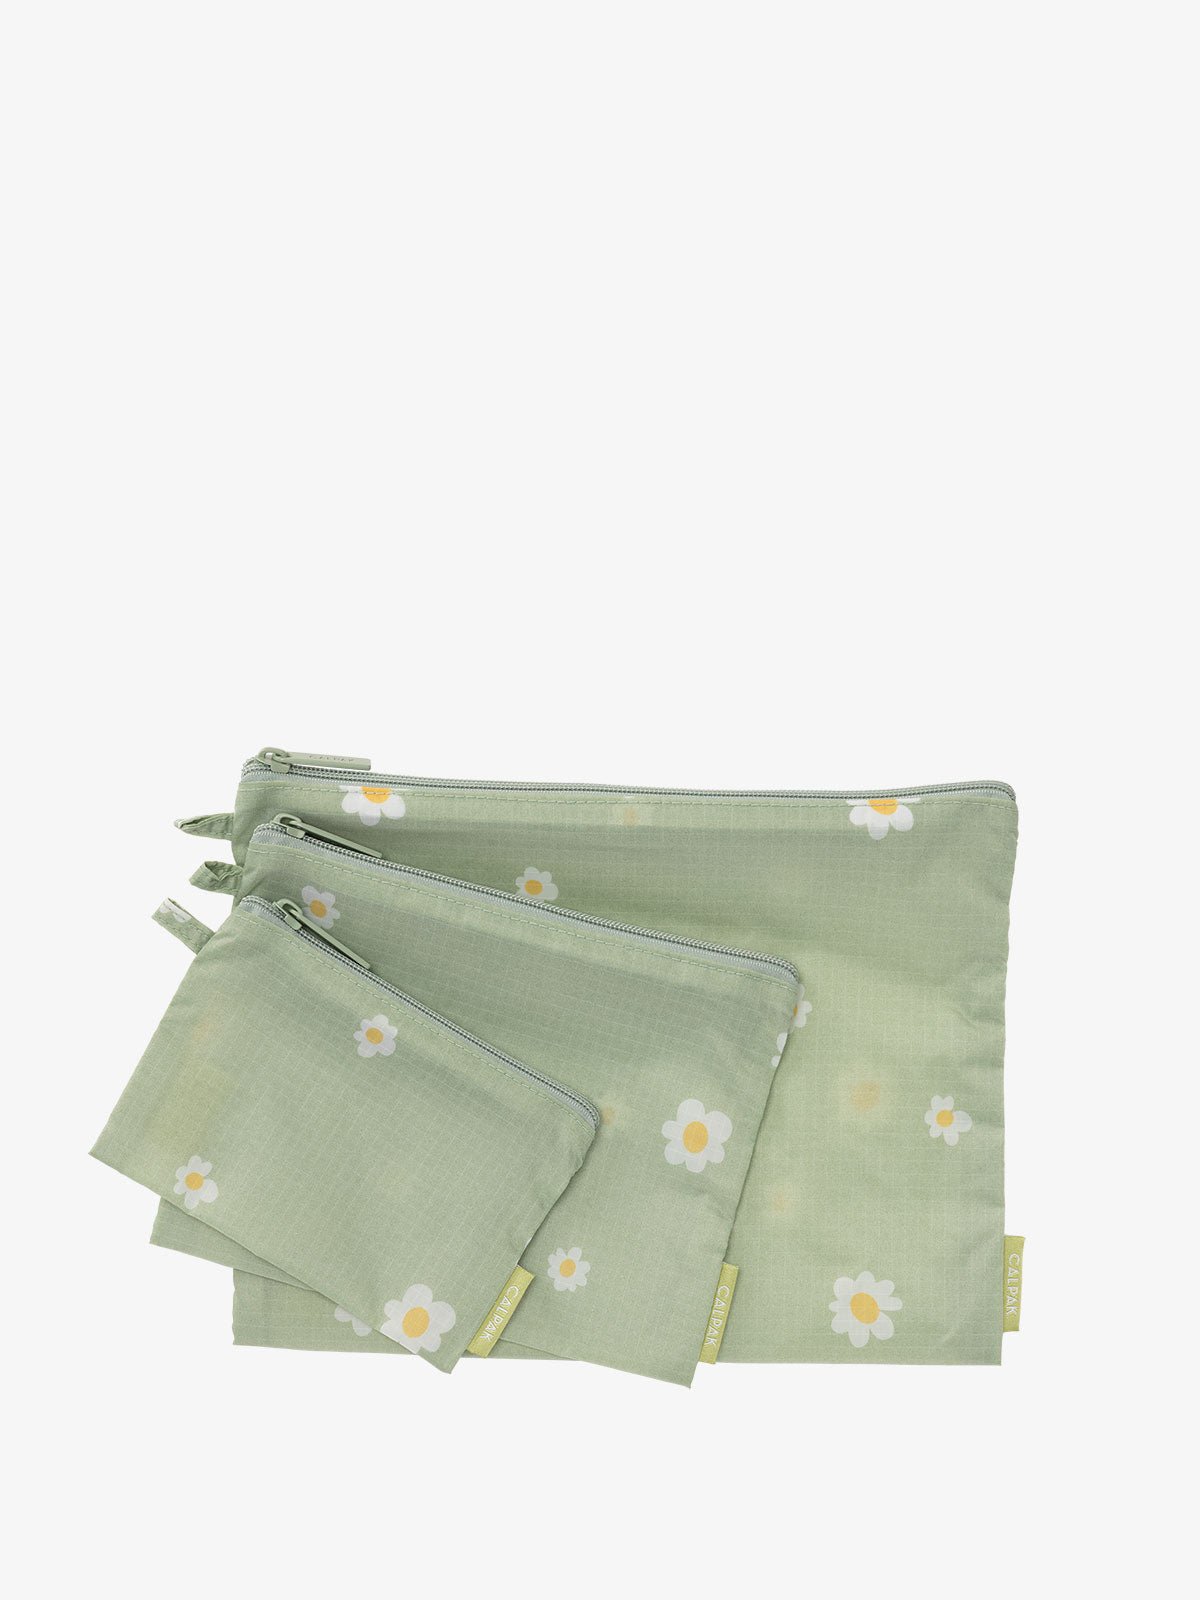 Set of small bags for storage and travel in daisy